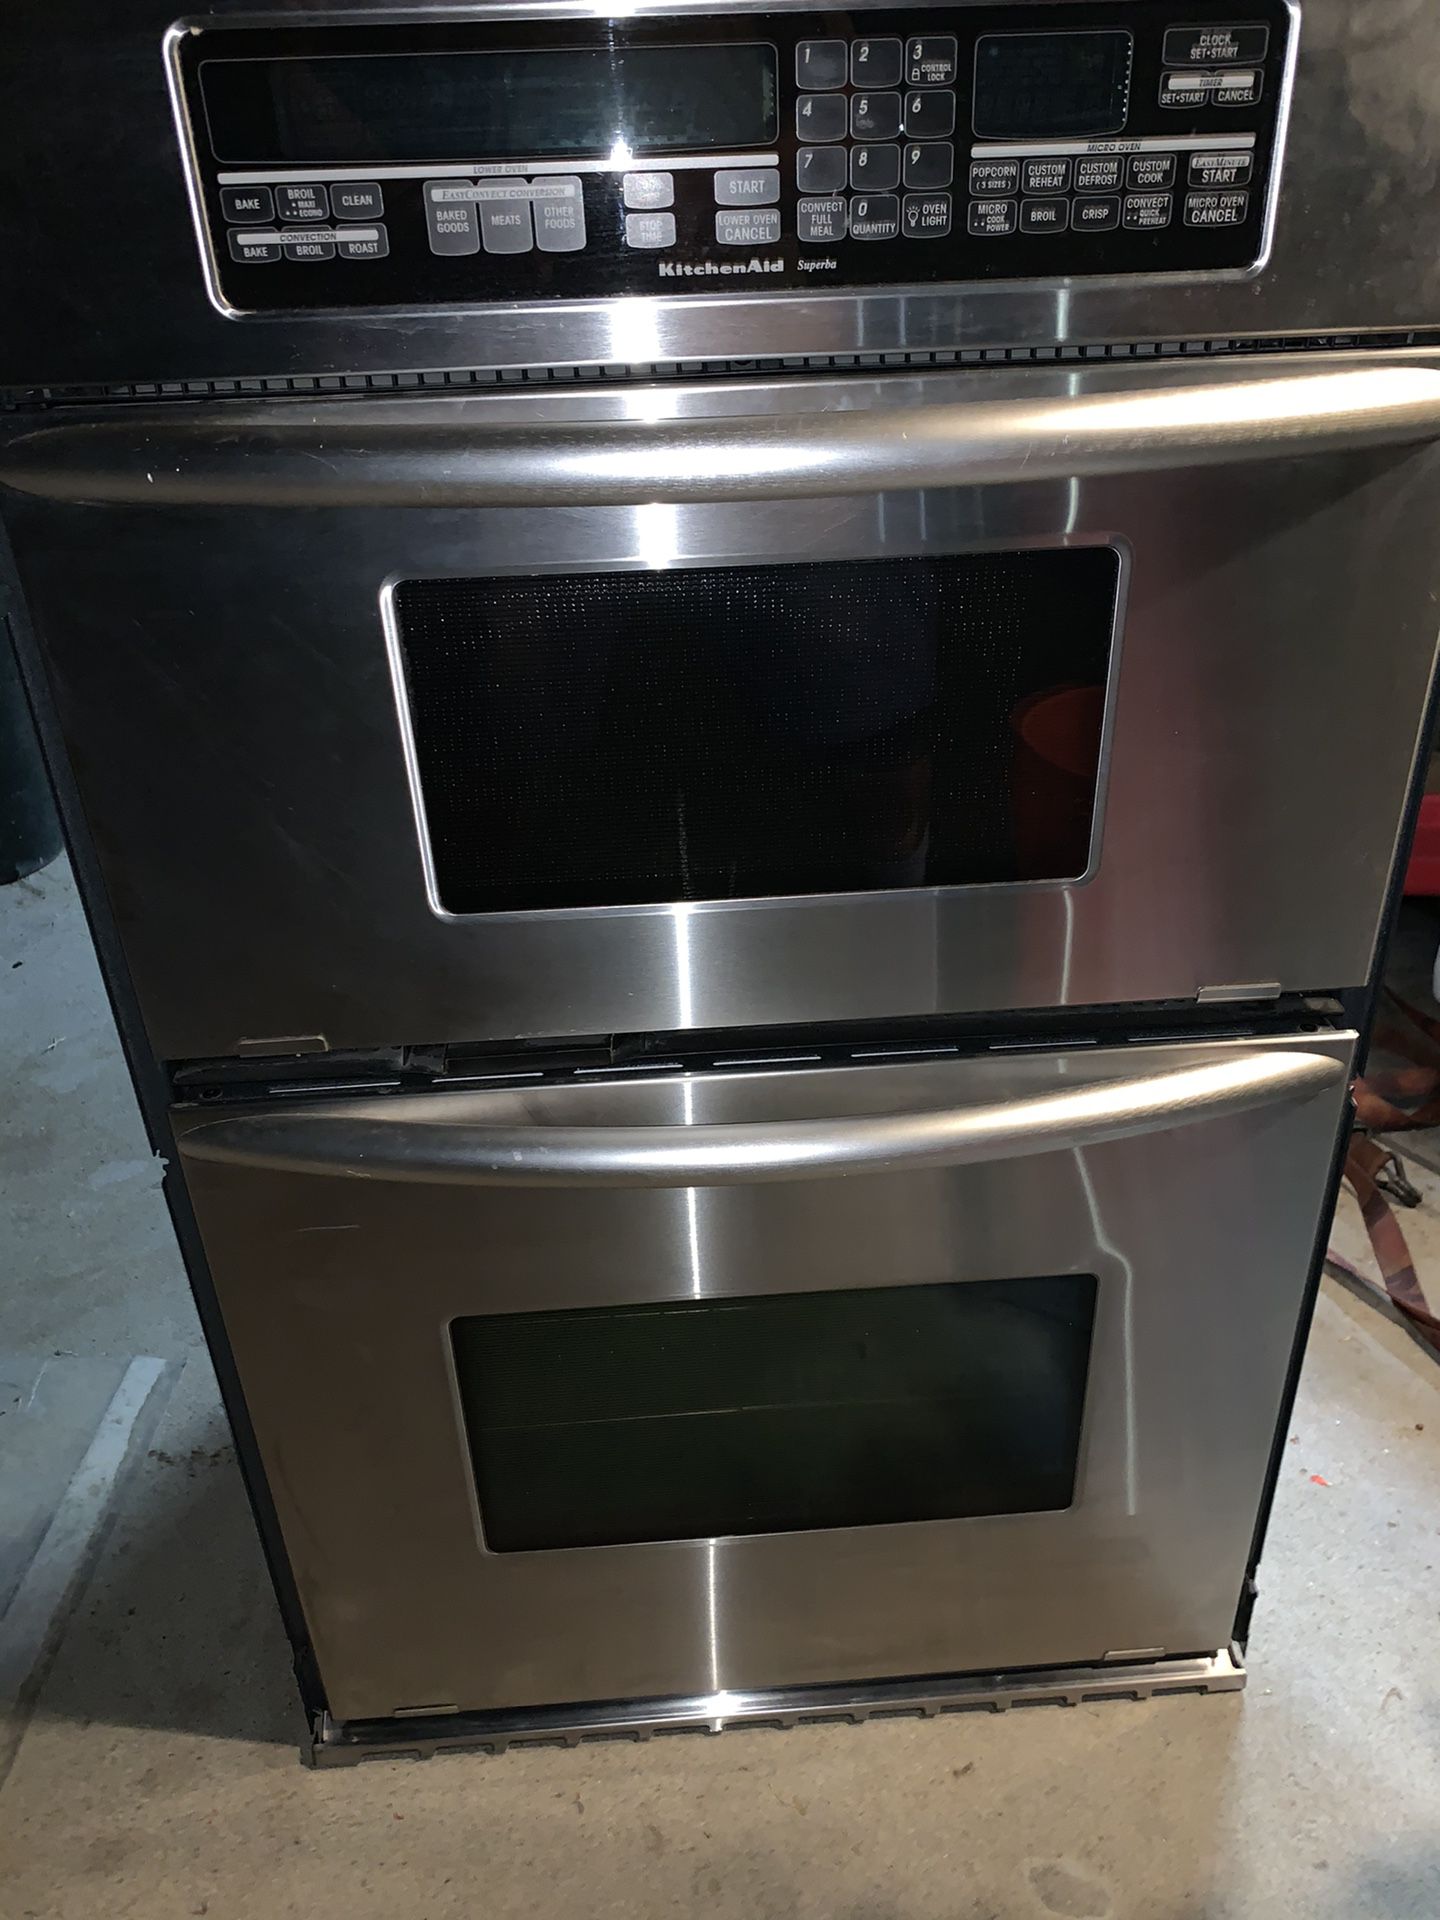 Kitchen Aid oven & Microwave